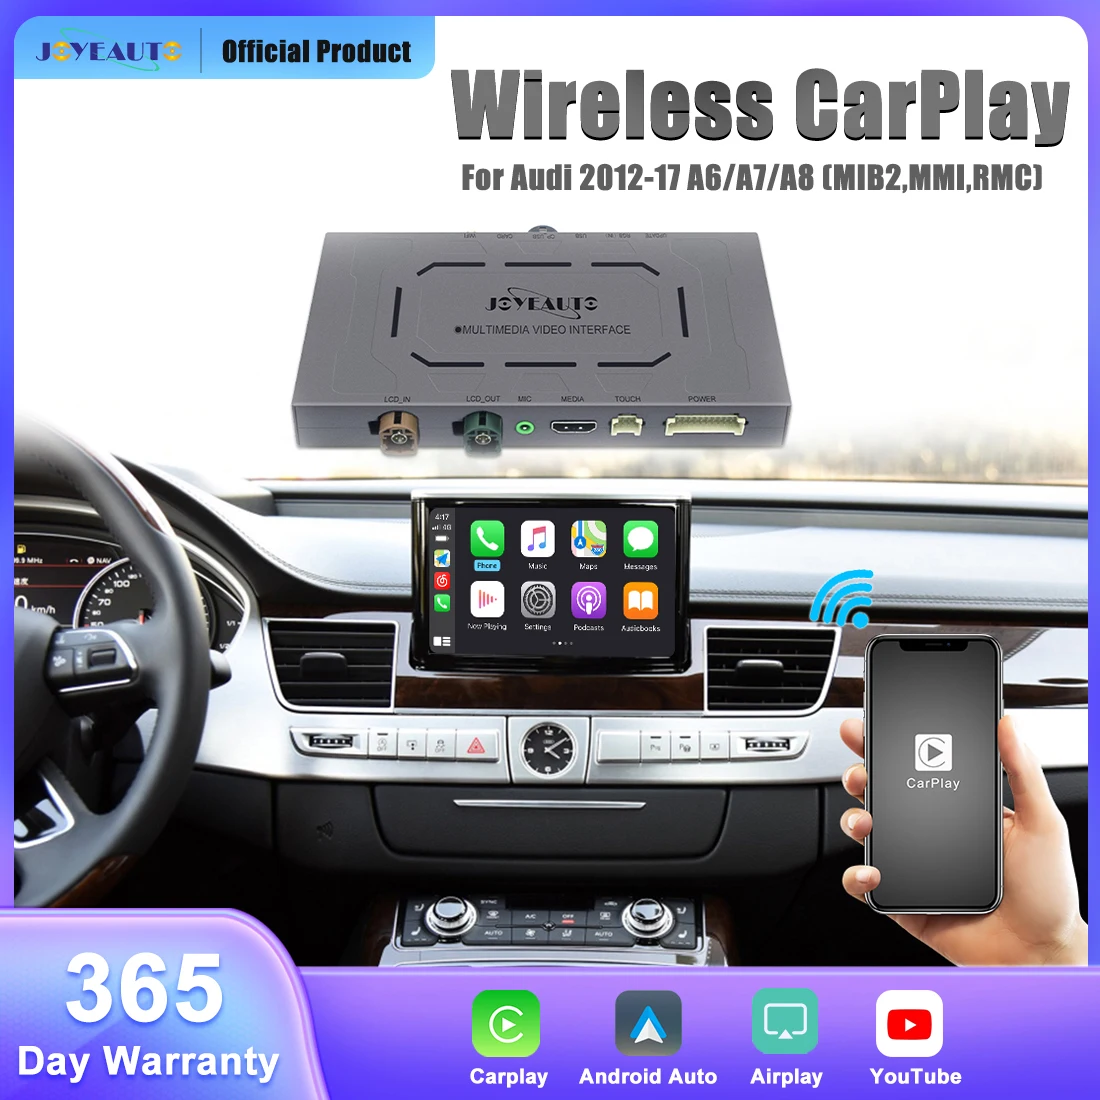 

JOYEAUTO Wireless Apple CarPlay Android Auto Module for Audi A6 A7 A8 MIB2 MMI RMC 2012-17 With Mirror Link AirPlay Retrofit Kit